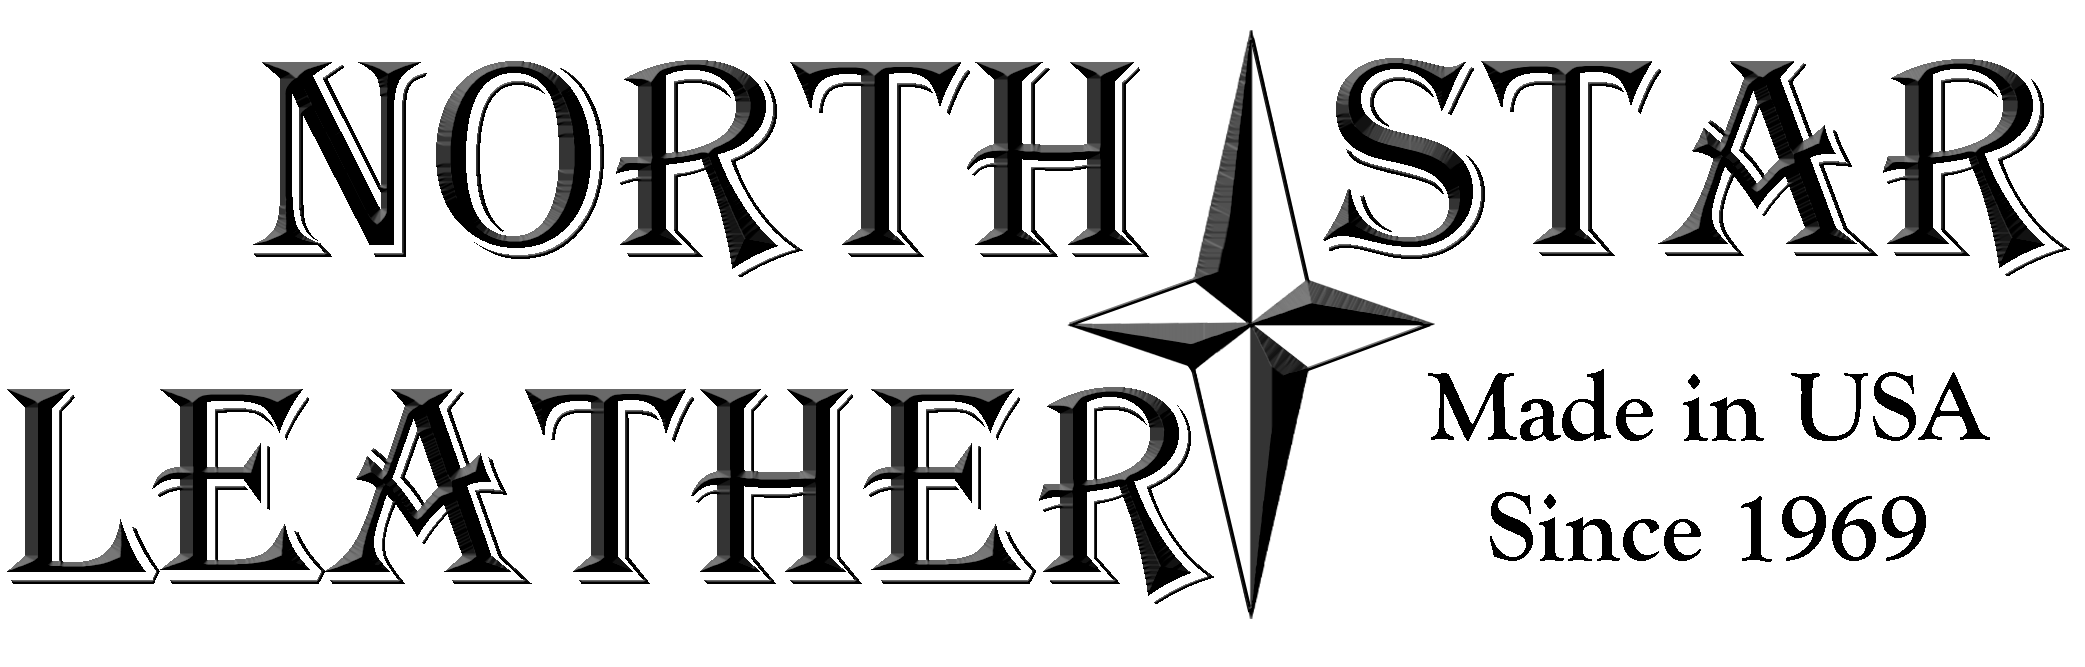 Welcome To North Star Leather